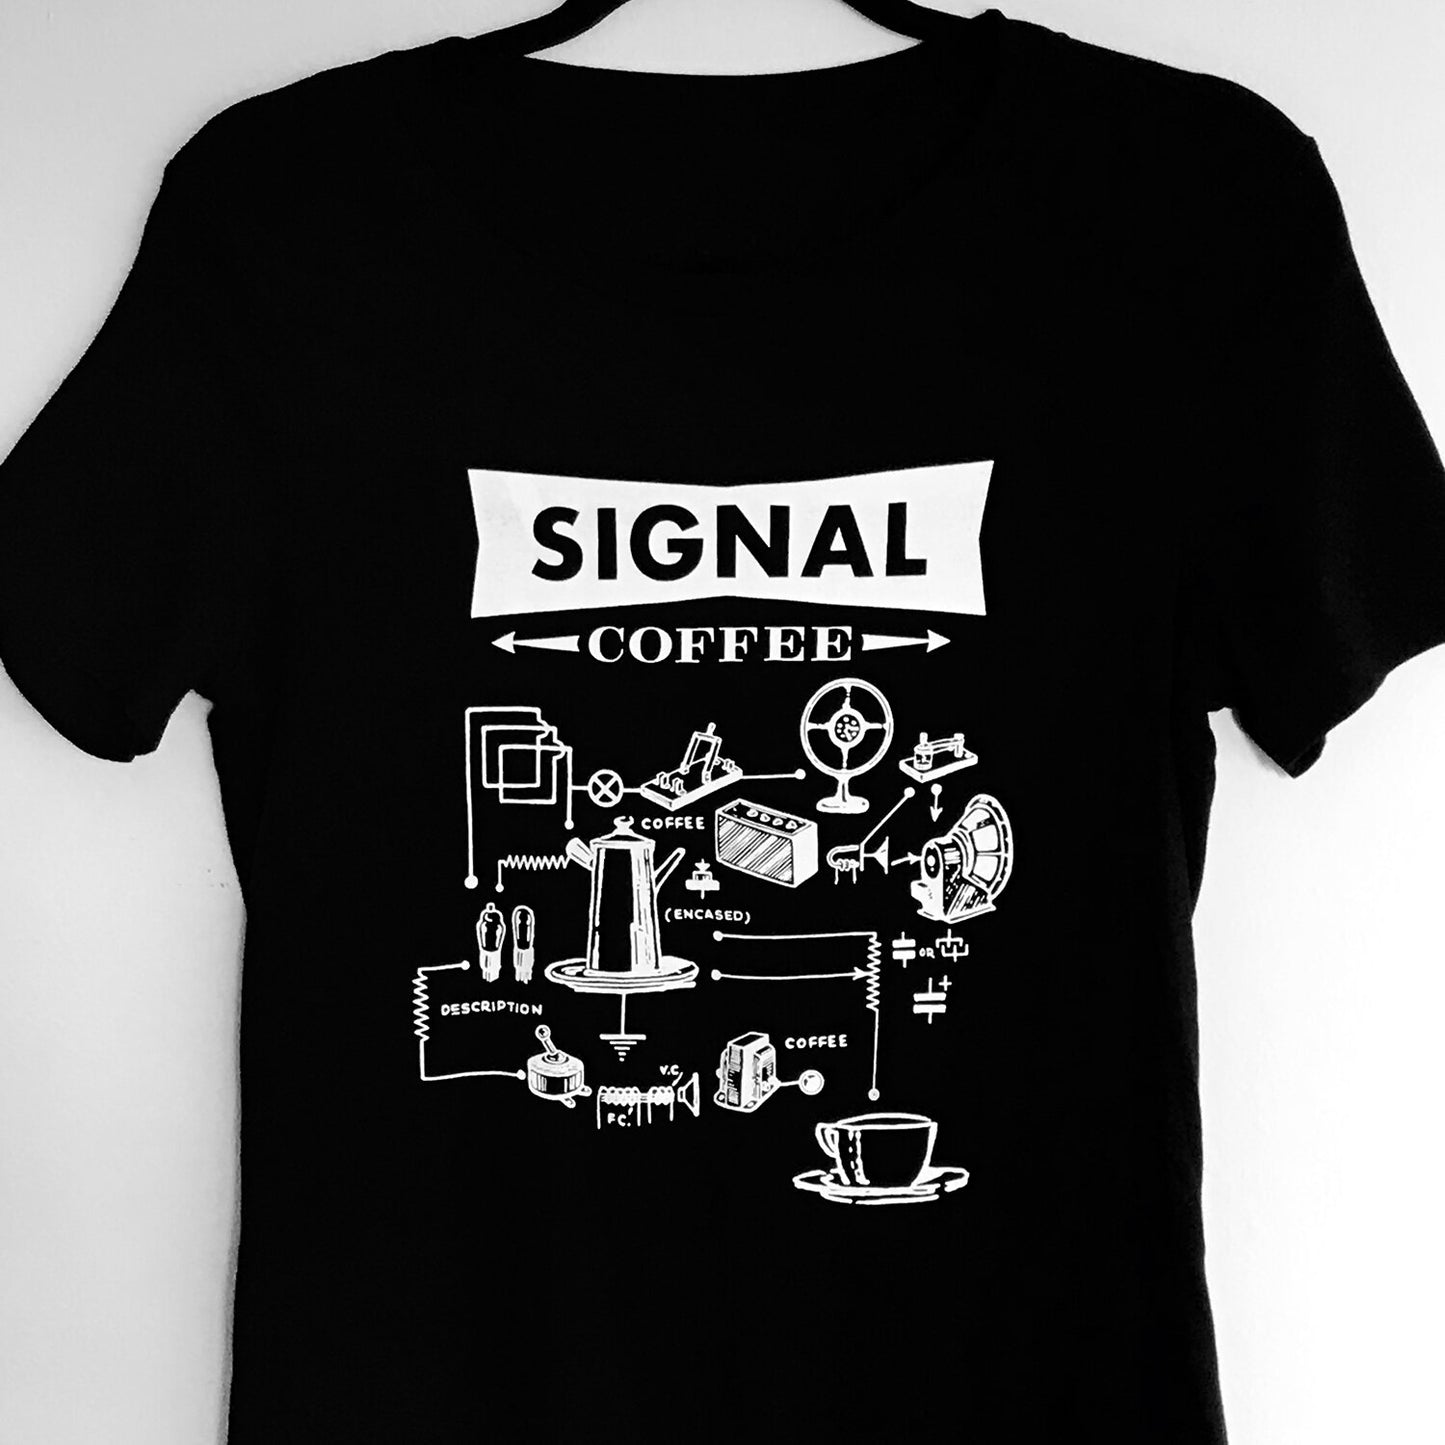 SIGNAL T  vol. 1  by Robby Poore of @biovarg